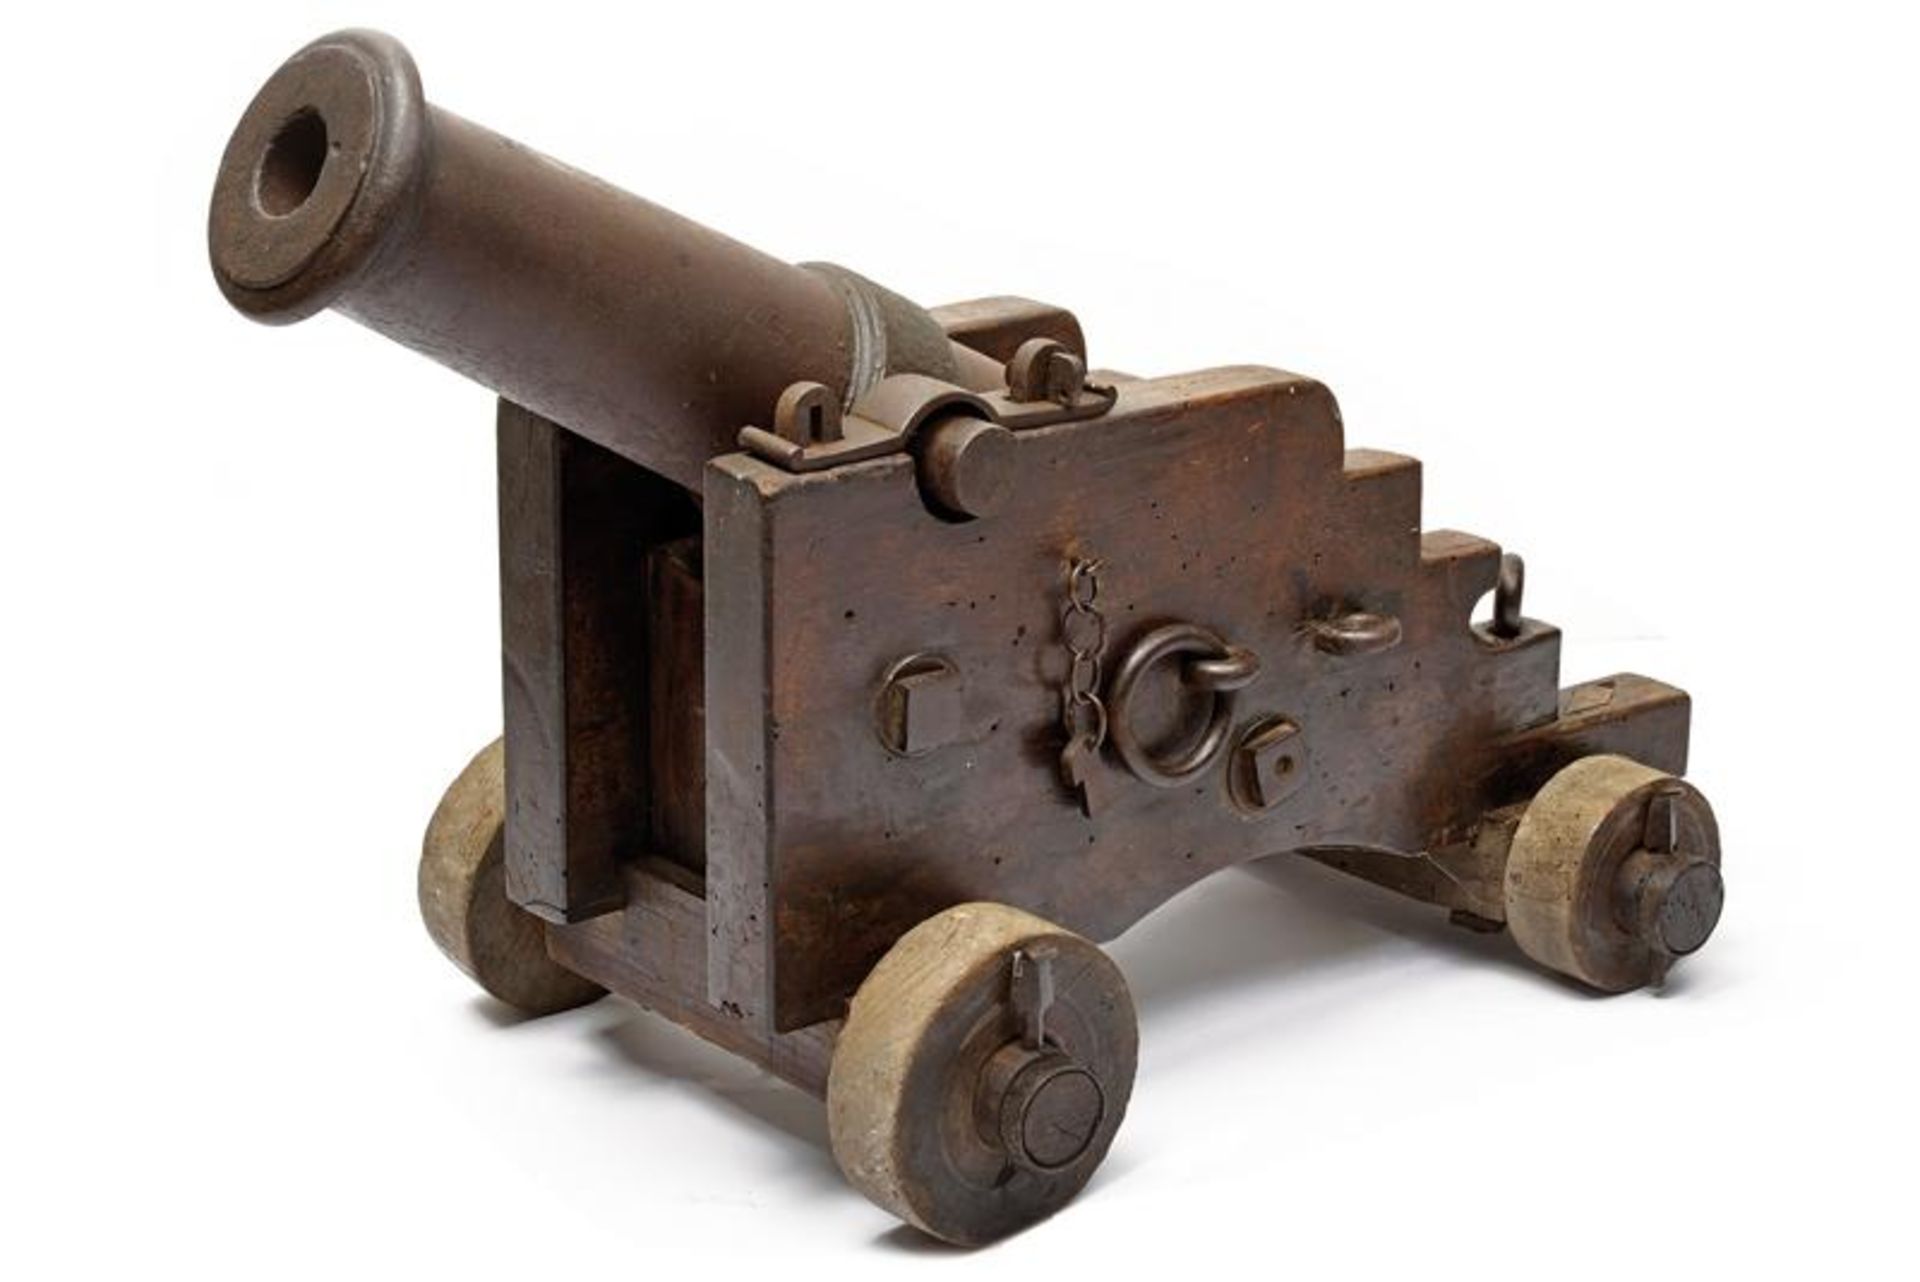 A small iron cannon with carriage